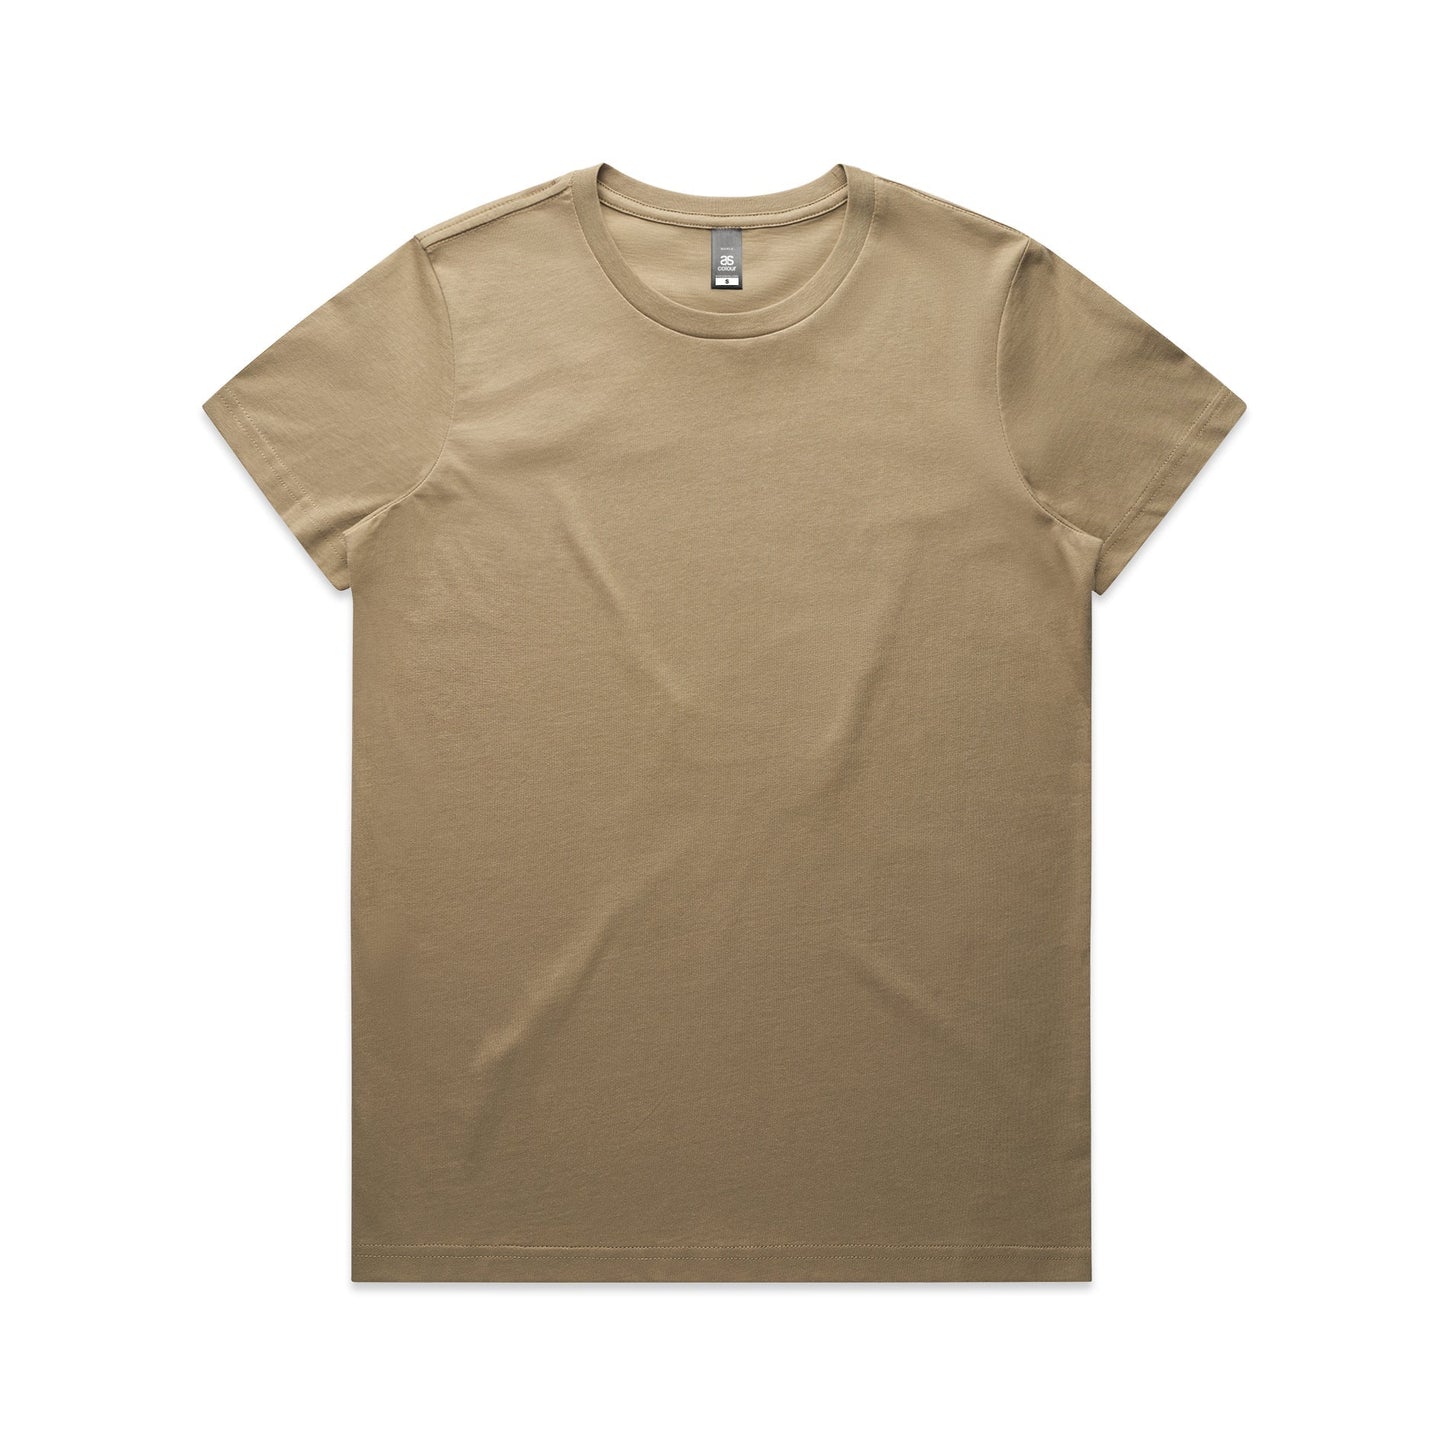 "I wish I could but I don't want to" Relaxed Maple T-Shirt